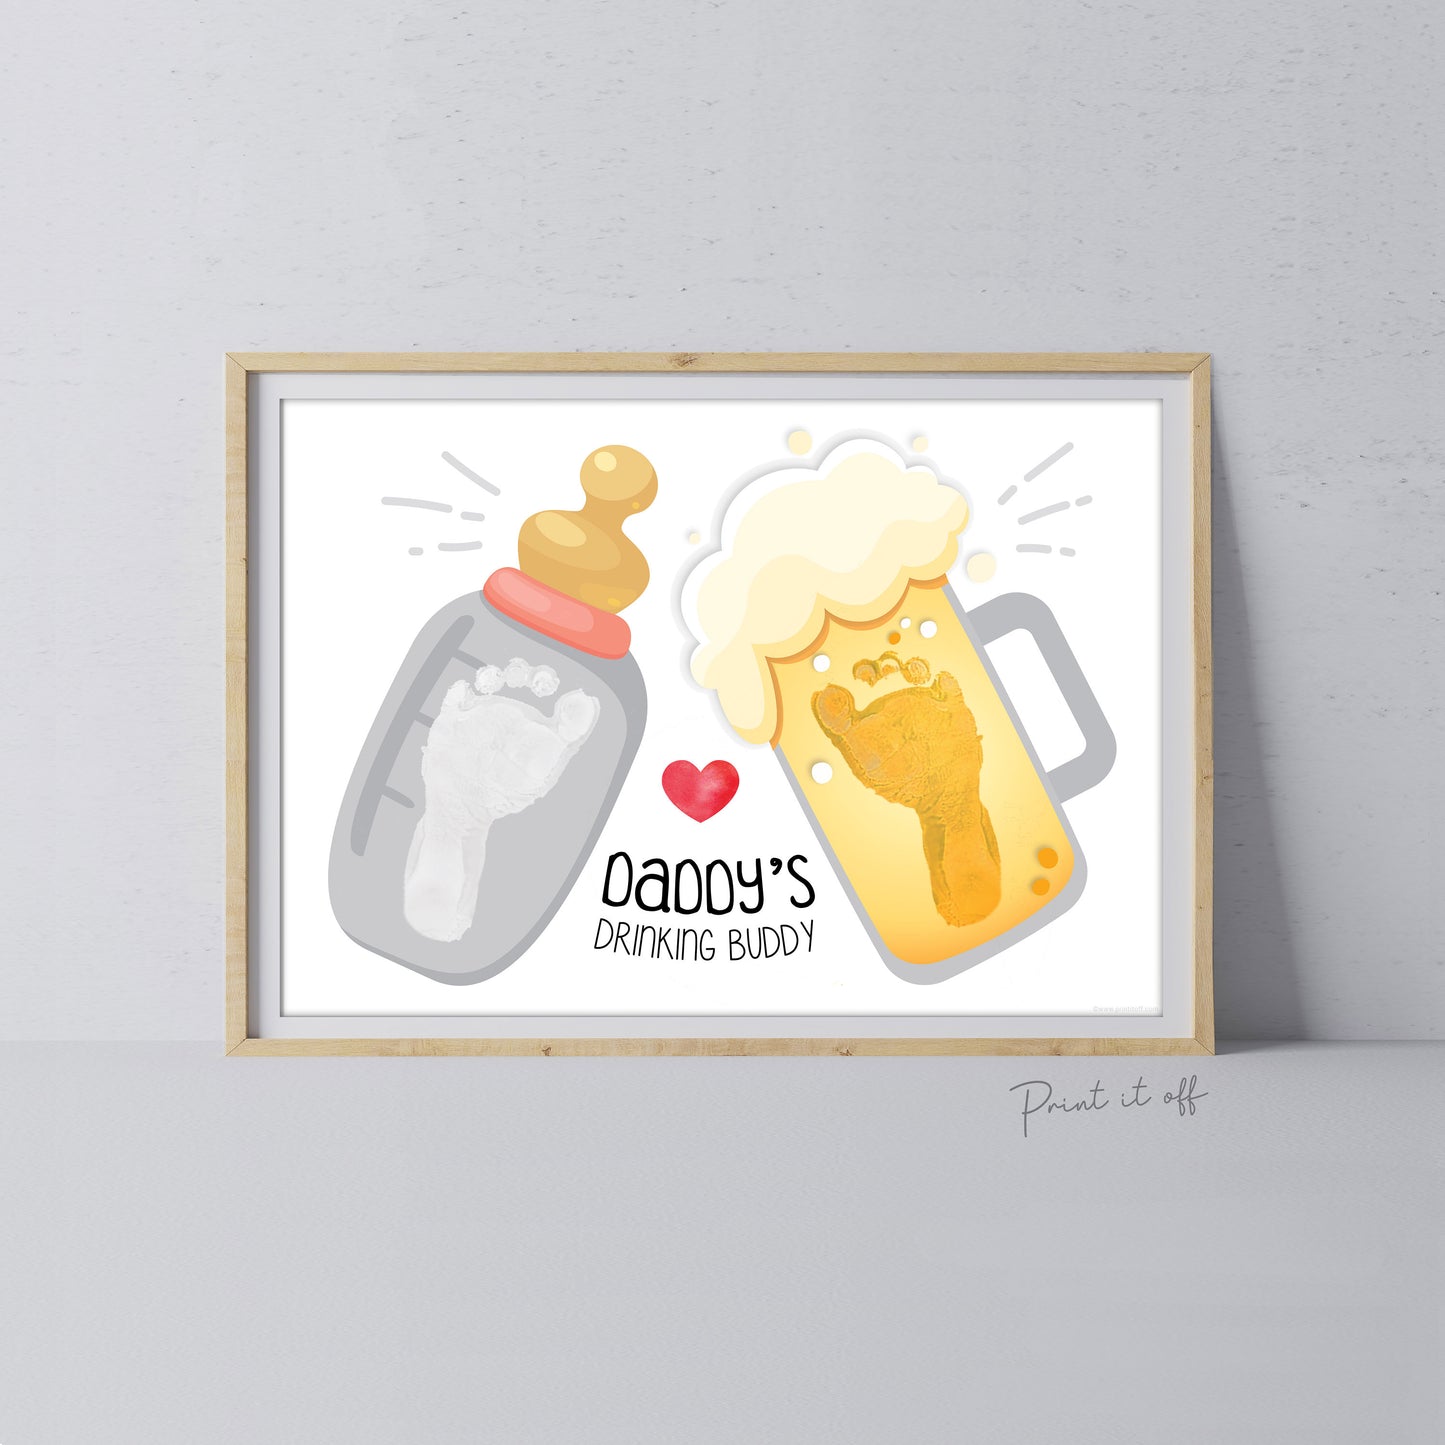 Daddy's Drinking Buddy Footprint Handprint Art Craft / First Father's Day Dad / Kids Baby Foot / Activity Gift DIY Card / Print it off 0730